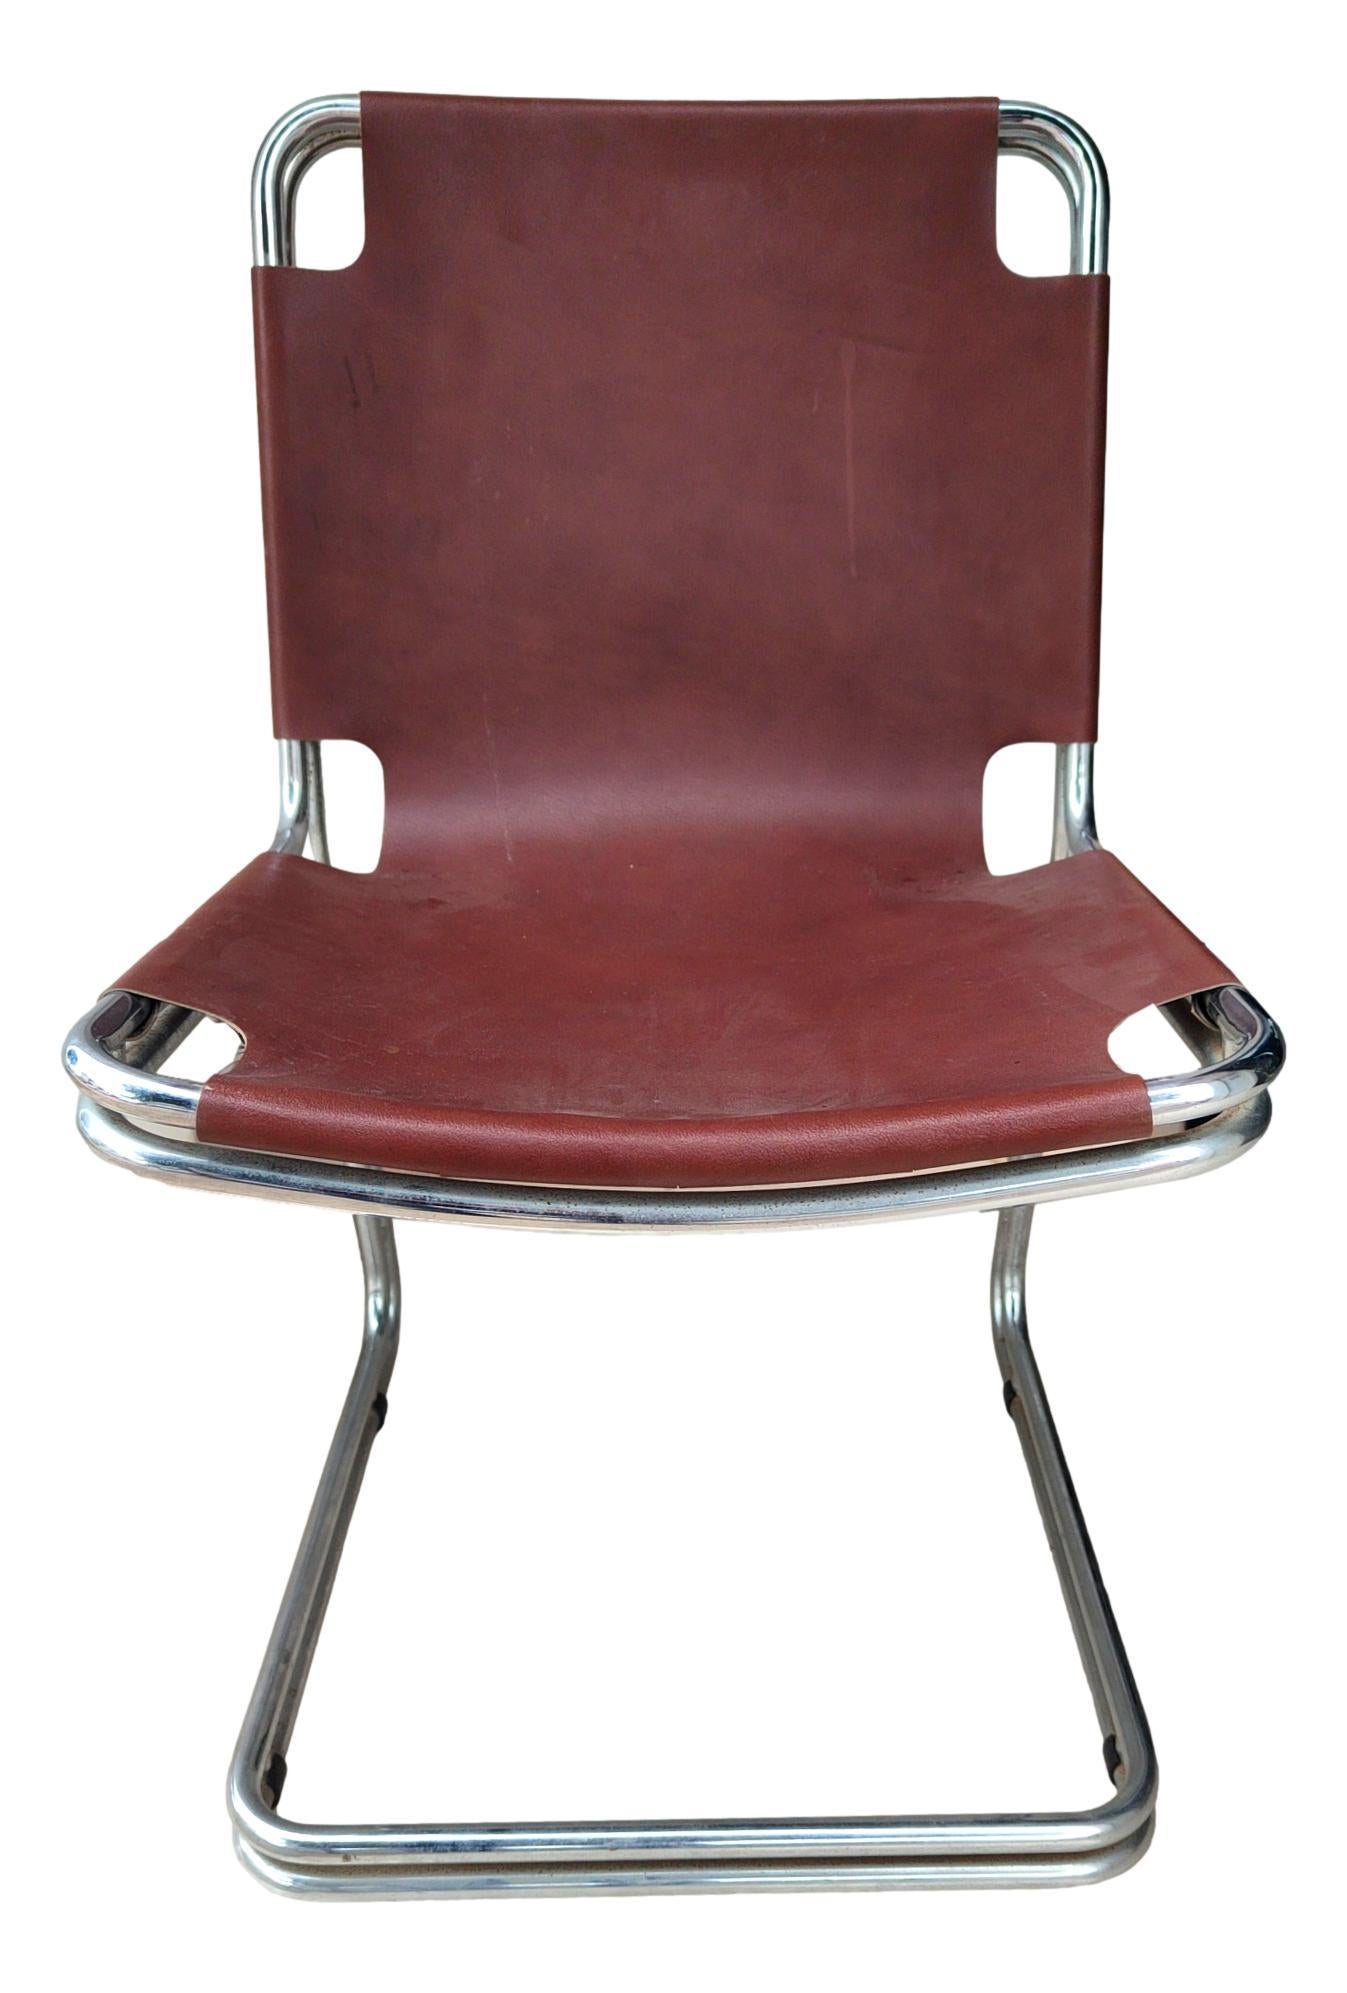 lot of four original 1970s Italian-made chairs designed in the style of Pascal Mourgue or Gastone Rinaldi,  metal and brown leather. 
They measure cm 85 in height, cm 45 in width, cm 55 in depth and cm 45 in seat height from the floor.
Very good